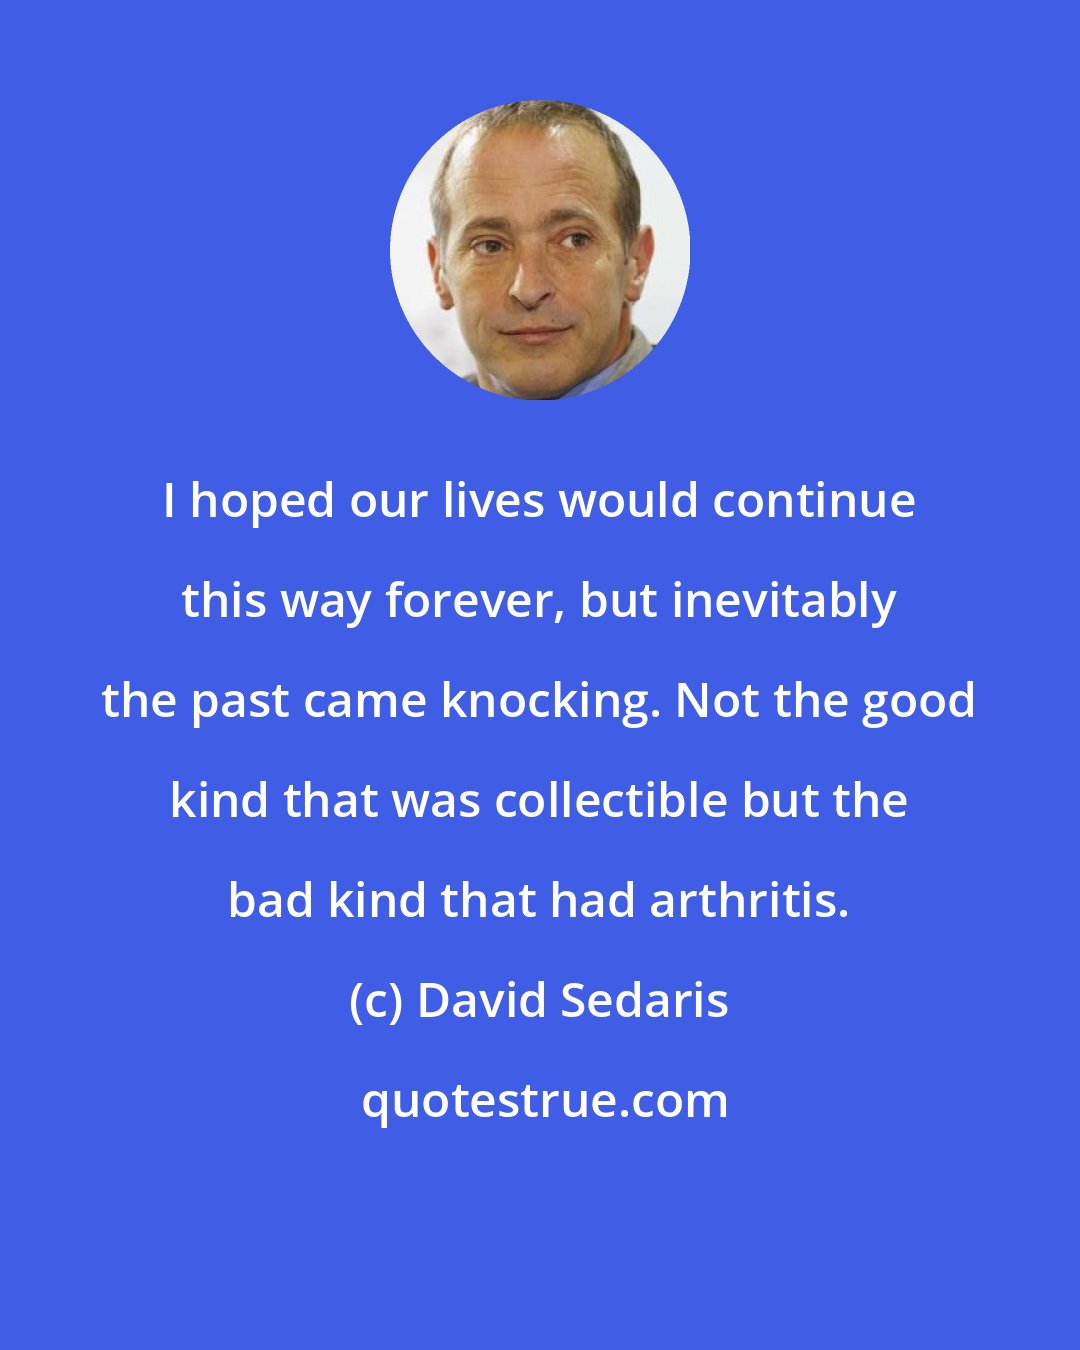 David Sedaris: I hoped our lives would continue this way forever, but inevitably the past came knocking. Not the good kind that was collectible but the bad kind that had arthritis.